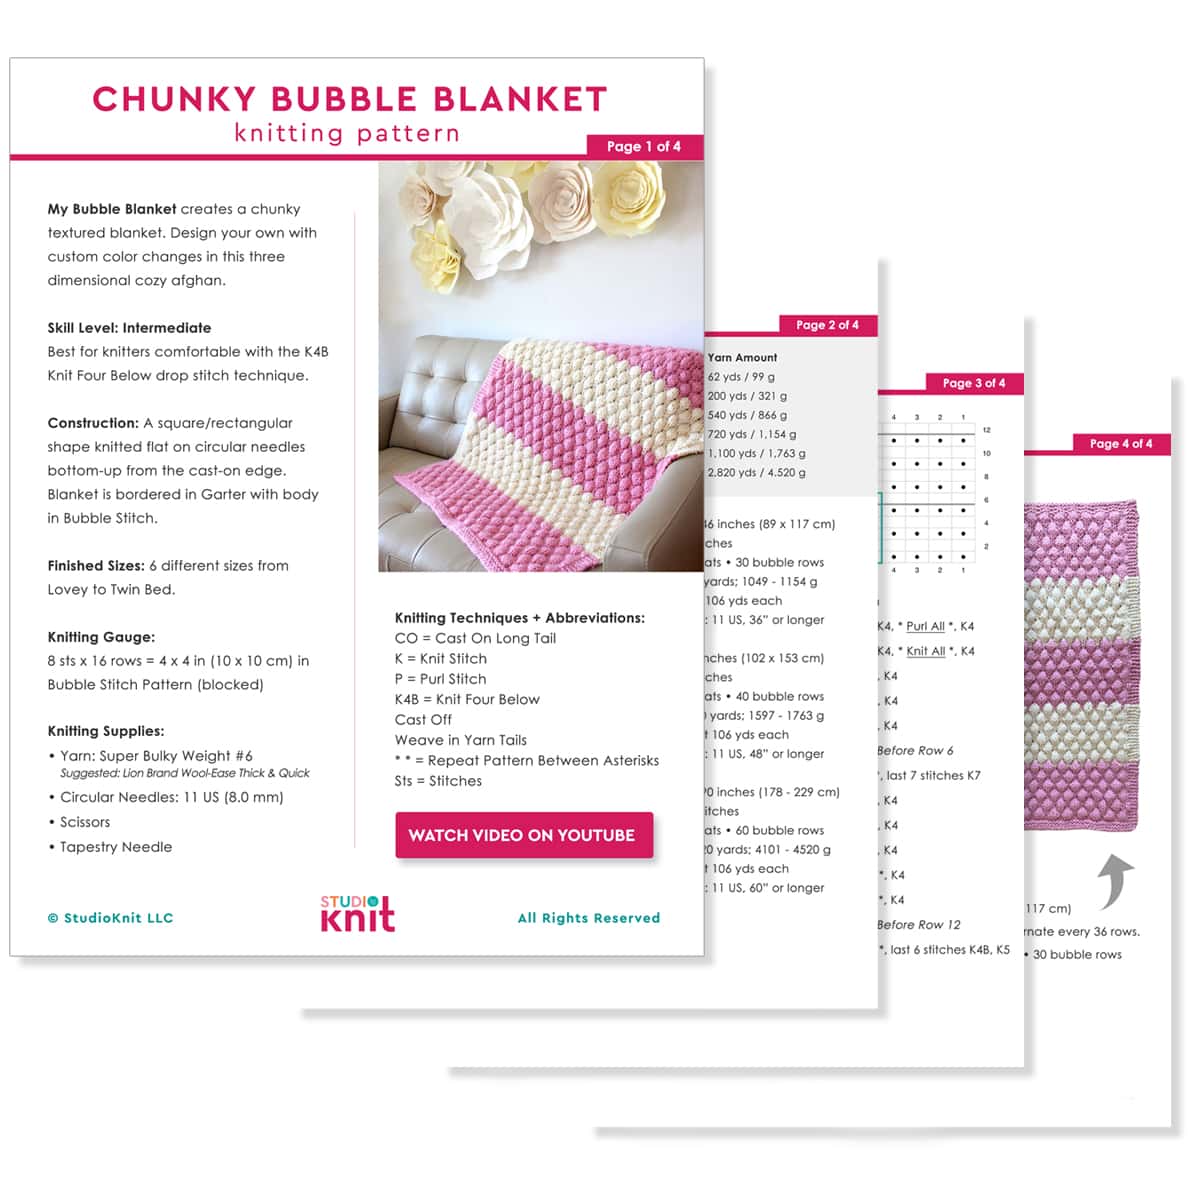 Printable knitting pattern of the Chunky Bubble Blanket by Studio Knit.